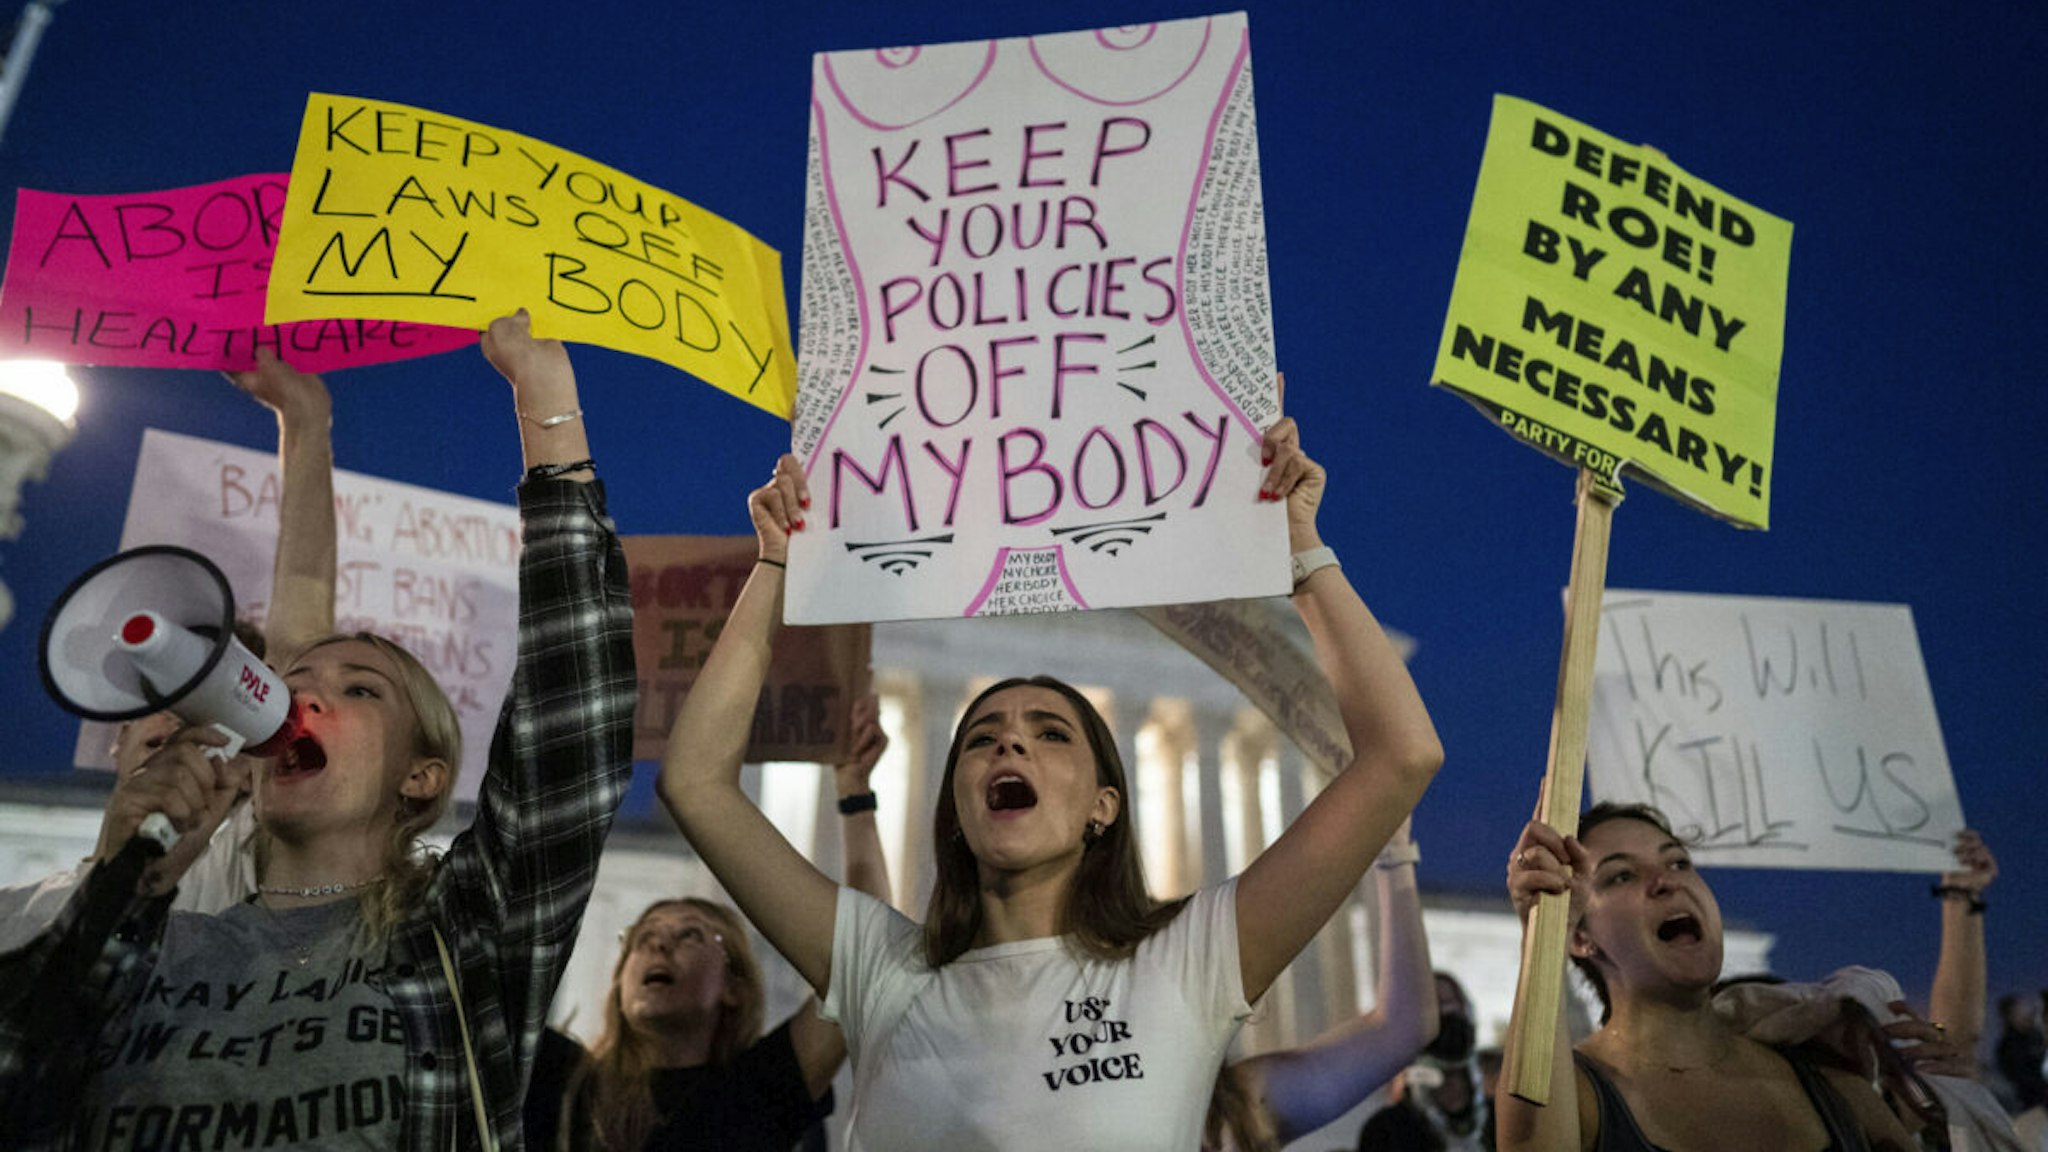 Pro-choice demonstrators, including Emma Harris, left, and Ellie Small, center, both students at George Washington University gather in front of the Supreme Court of the United States on Tuesday, May 3, 2022 in Washington, DC.